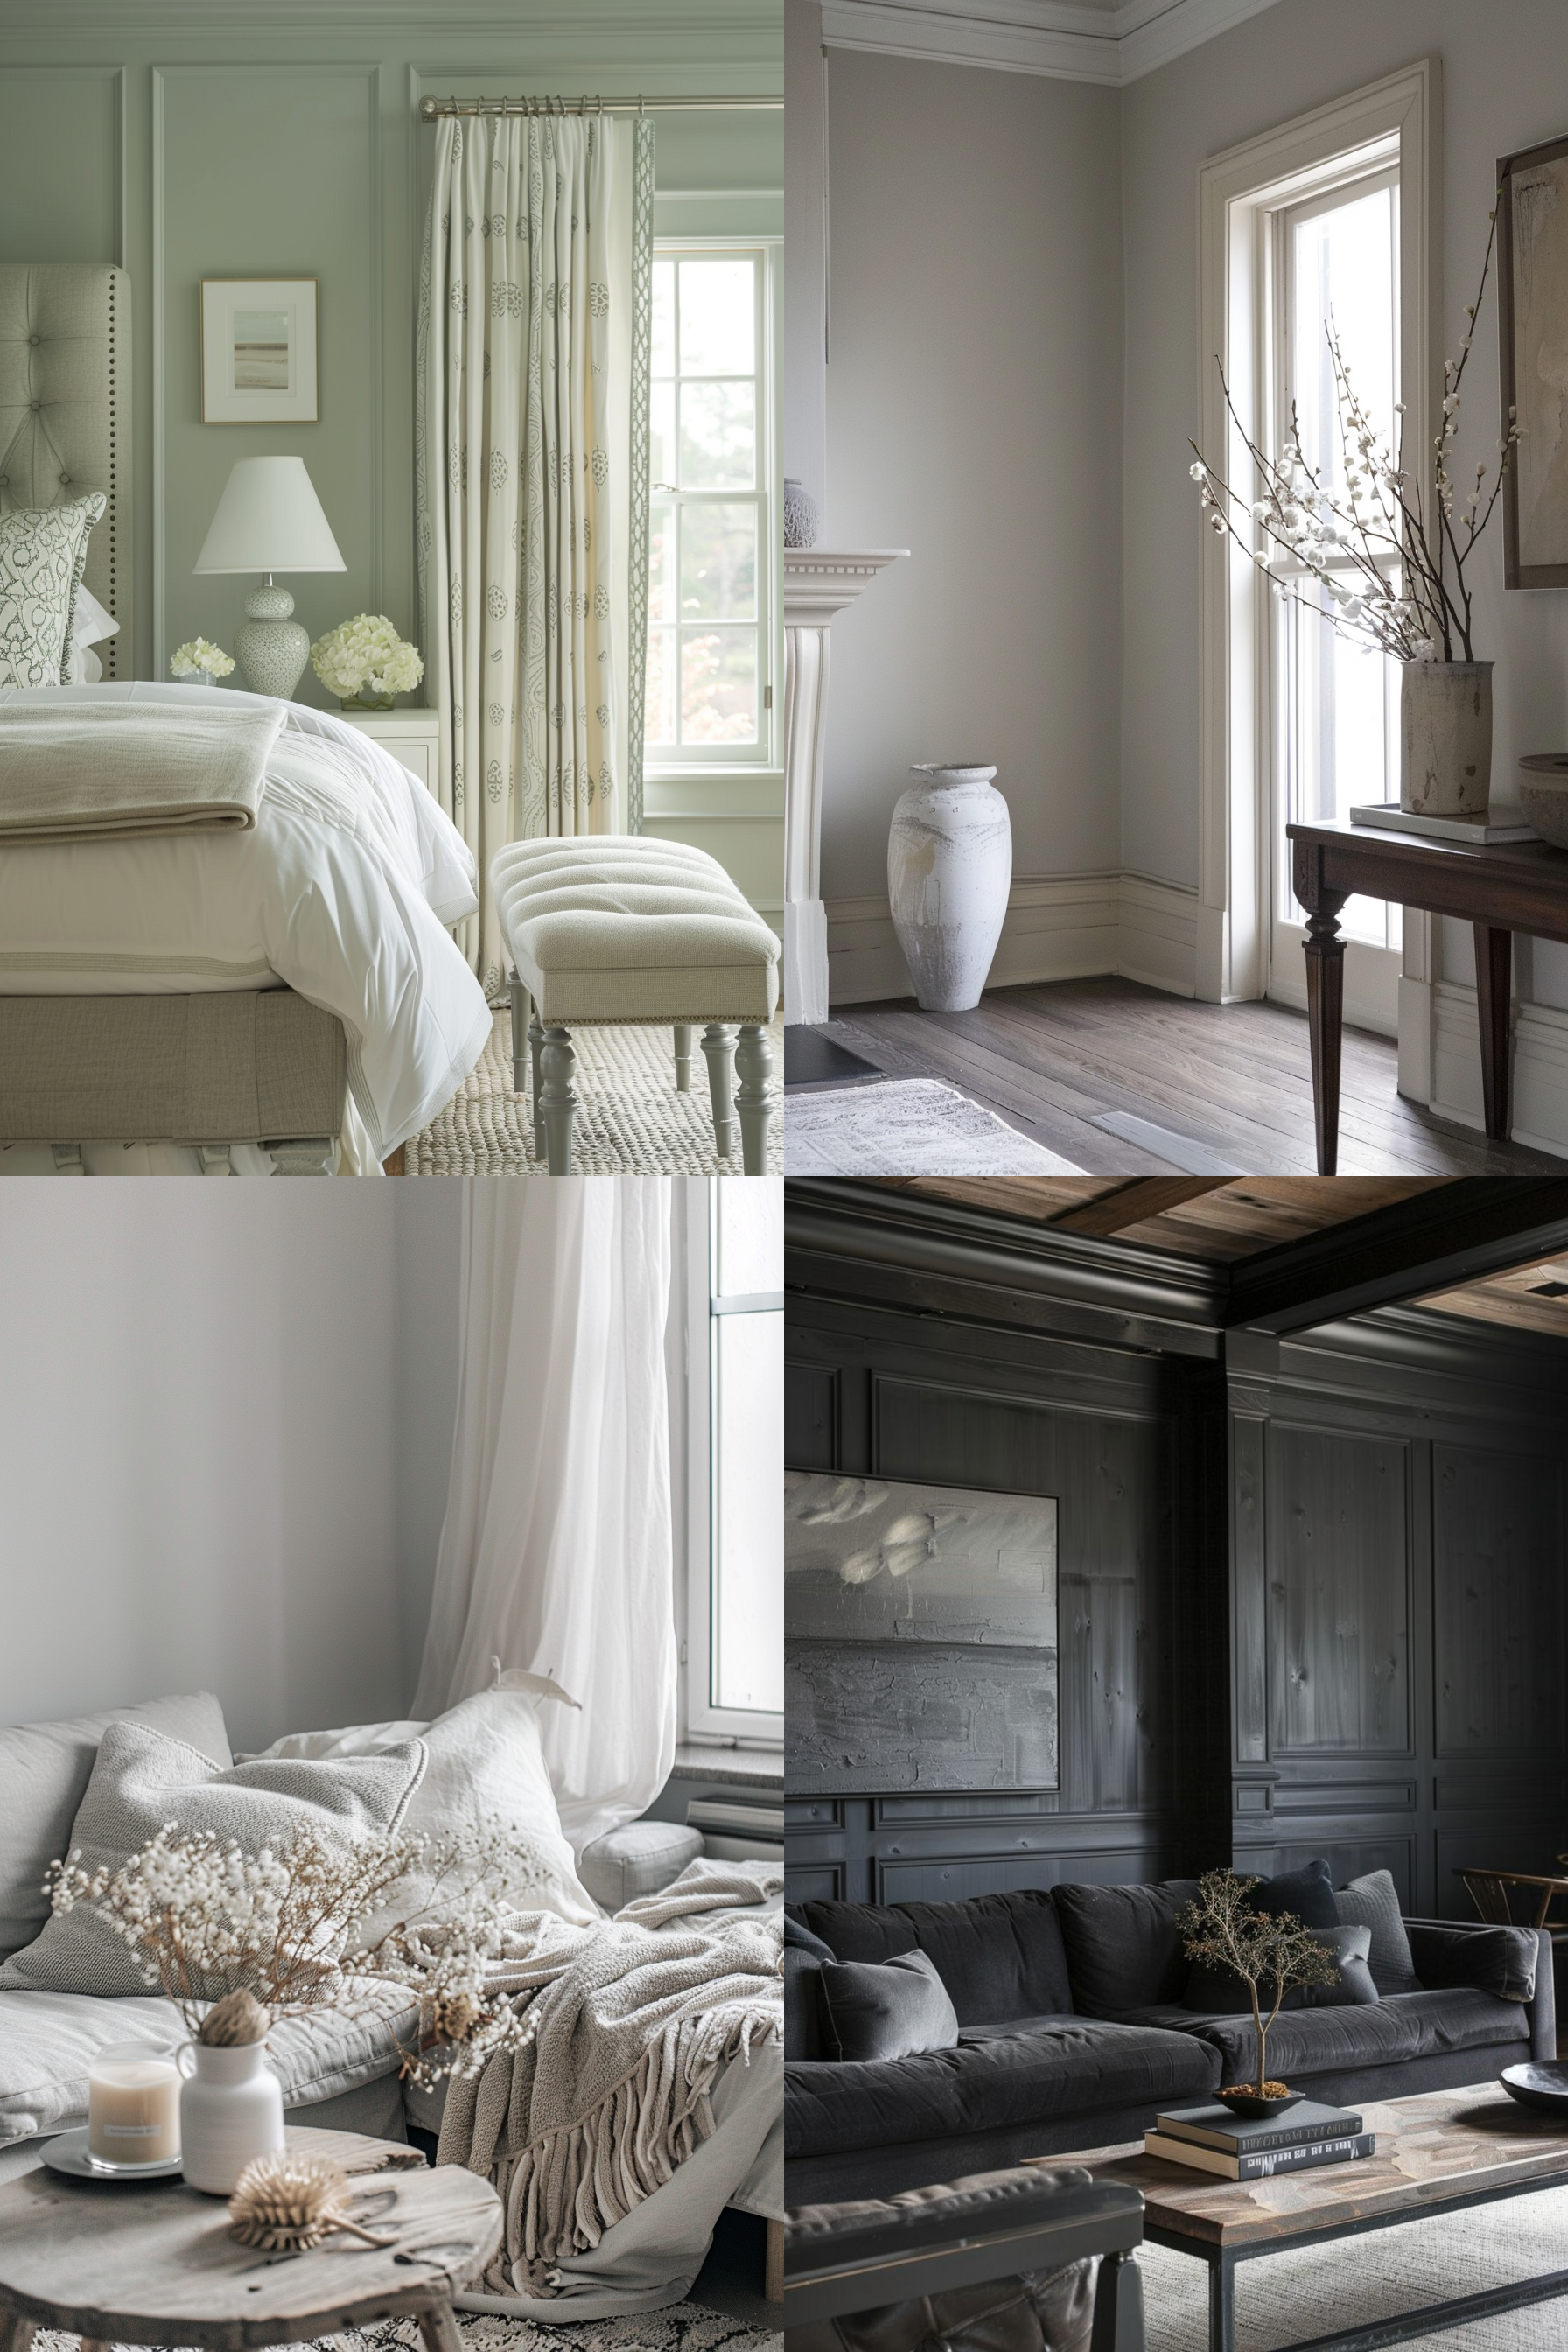 A collage of four cozy home interiors including a bedroom, a living room, and seating areas with neutral color palettes.